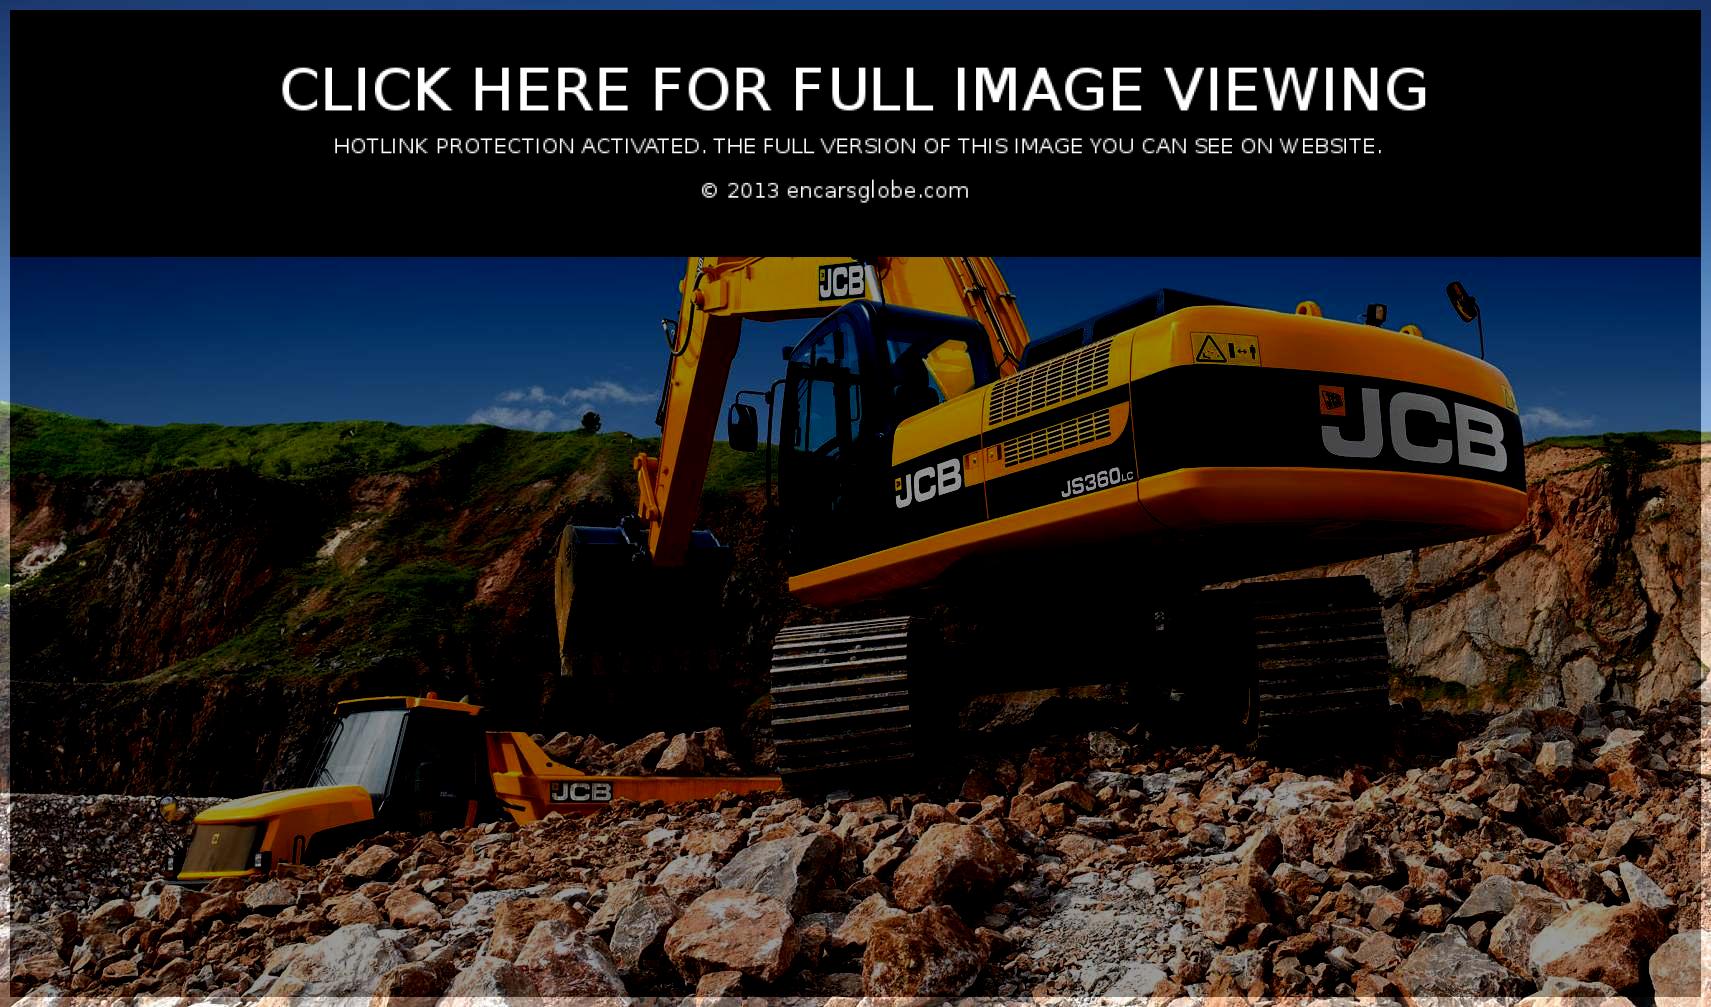 JCB JS 360 Photo Gallery: Photo #12 out of 10, Image Size - 600 x ...